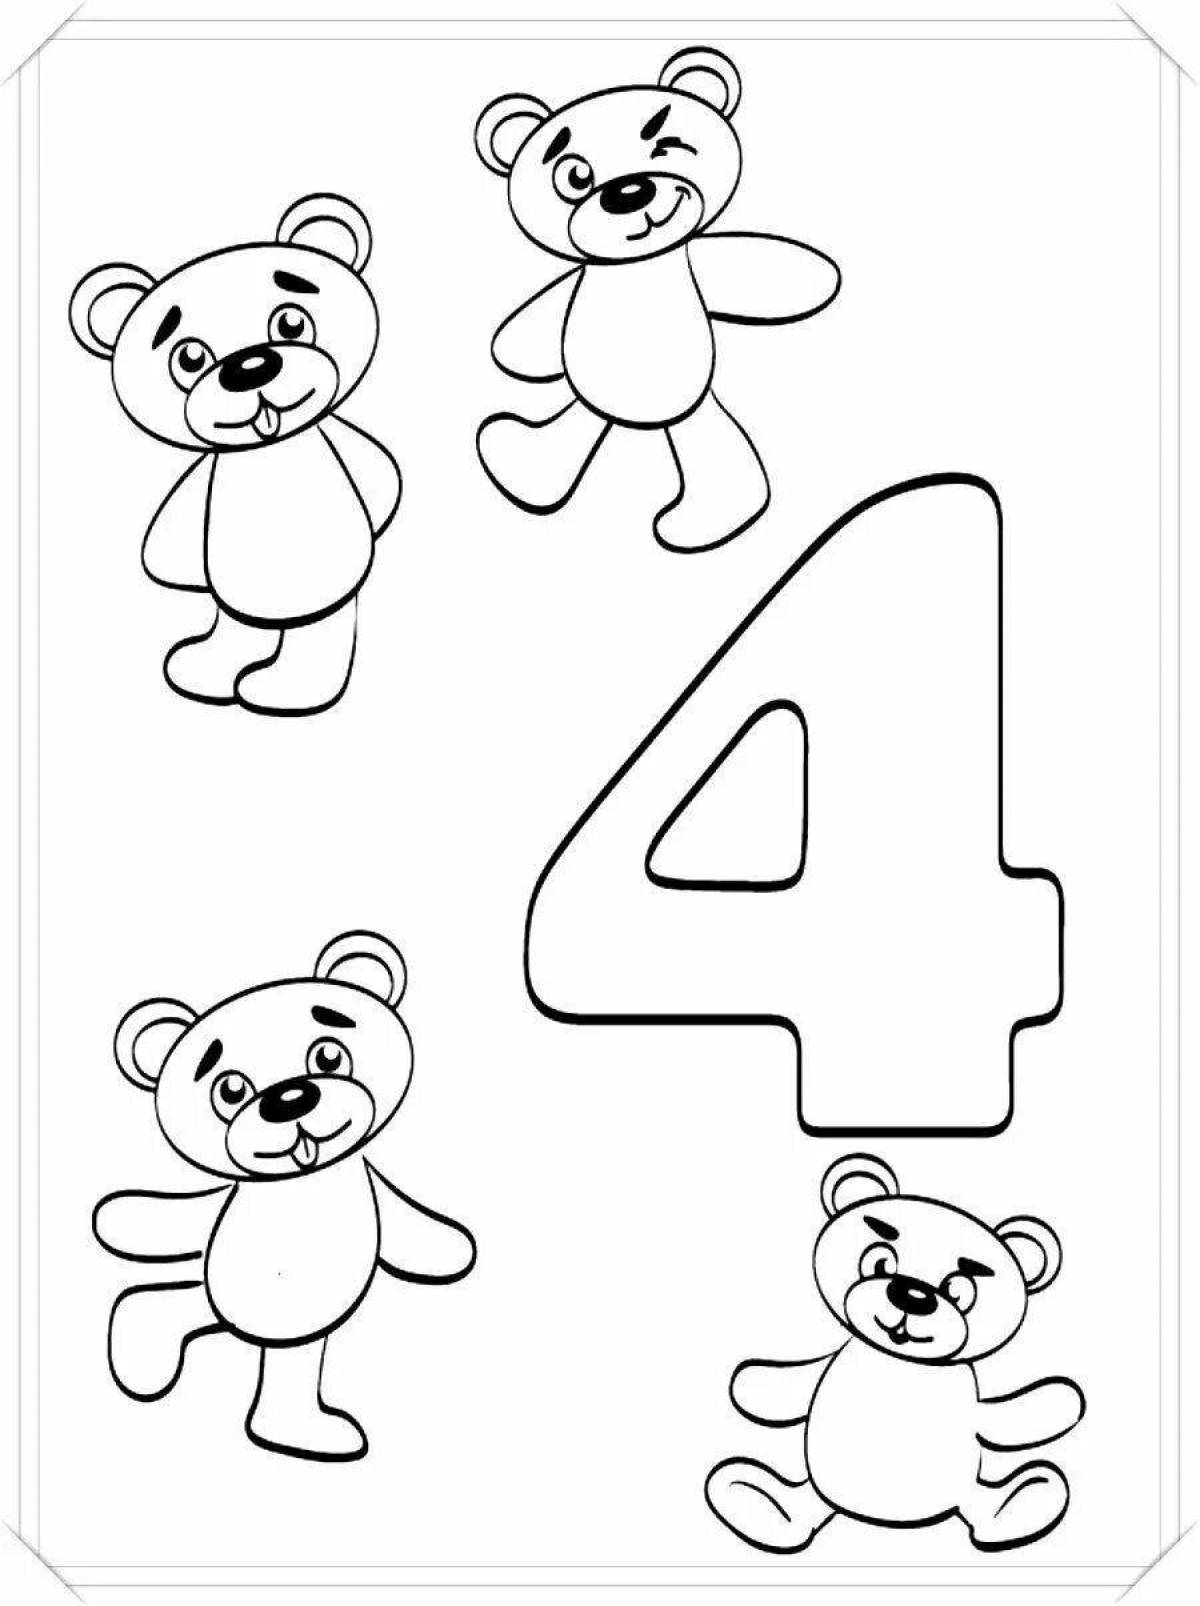 Fancy coloring page four